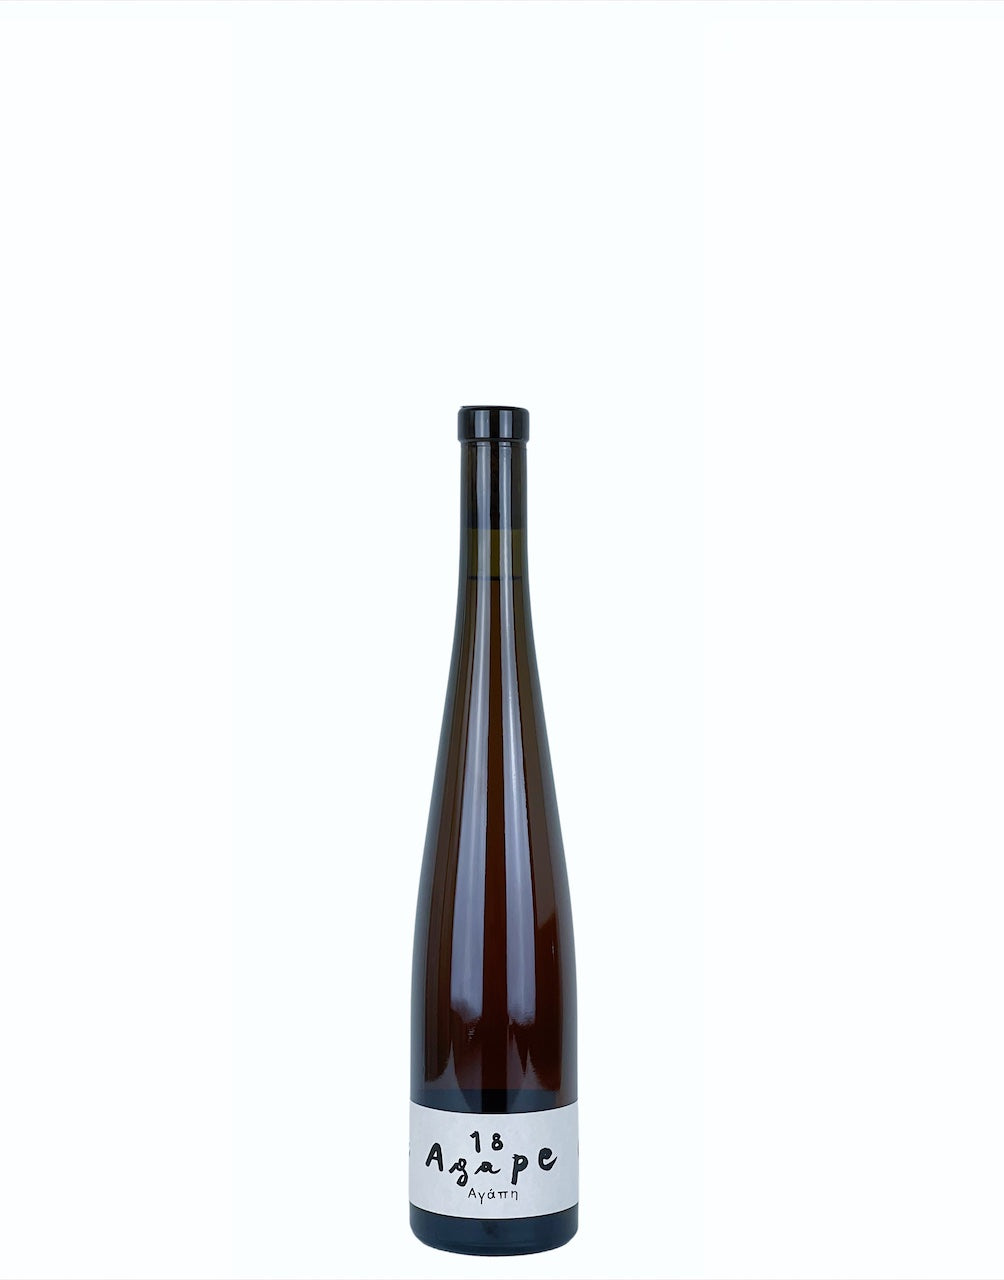 Bottle of Agape, a Natural Wine produced by Valdisole with Riesling grapes.